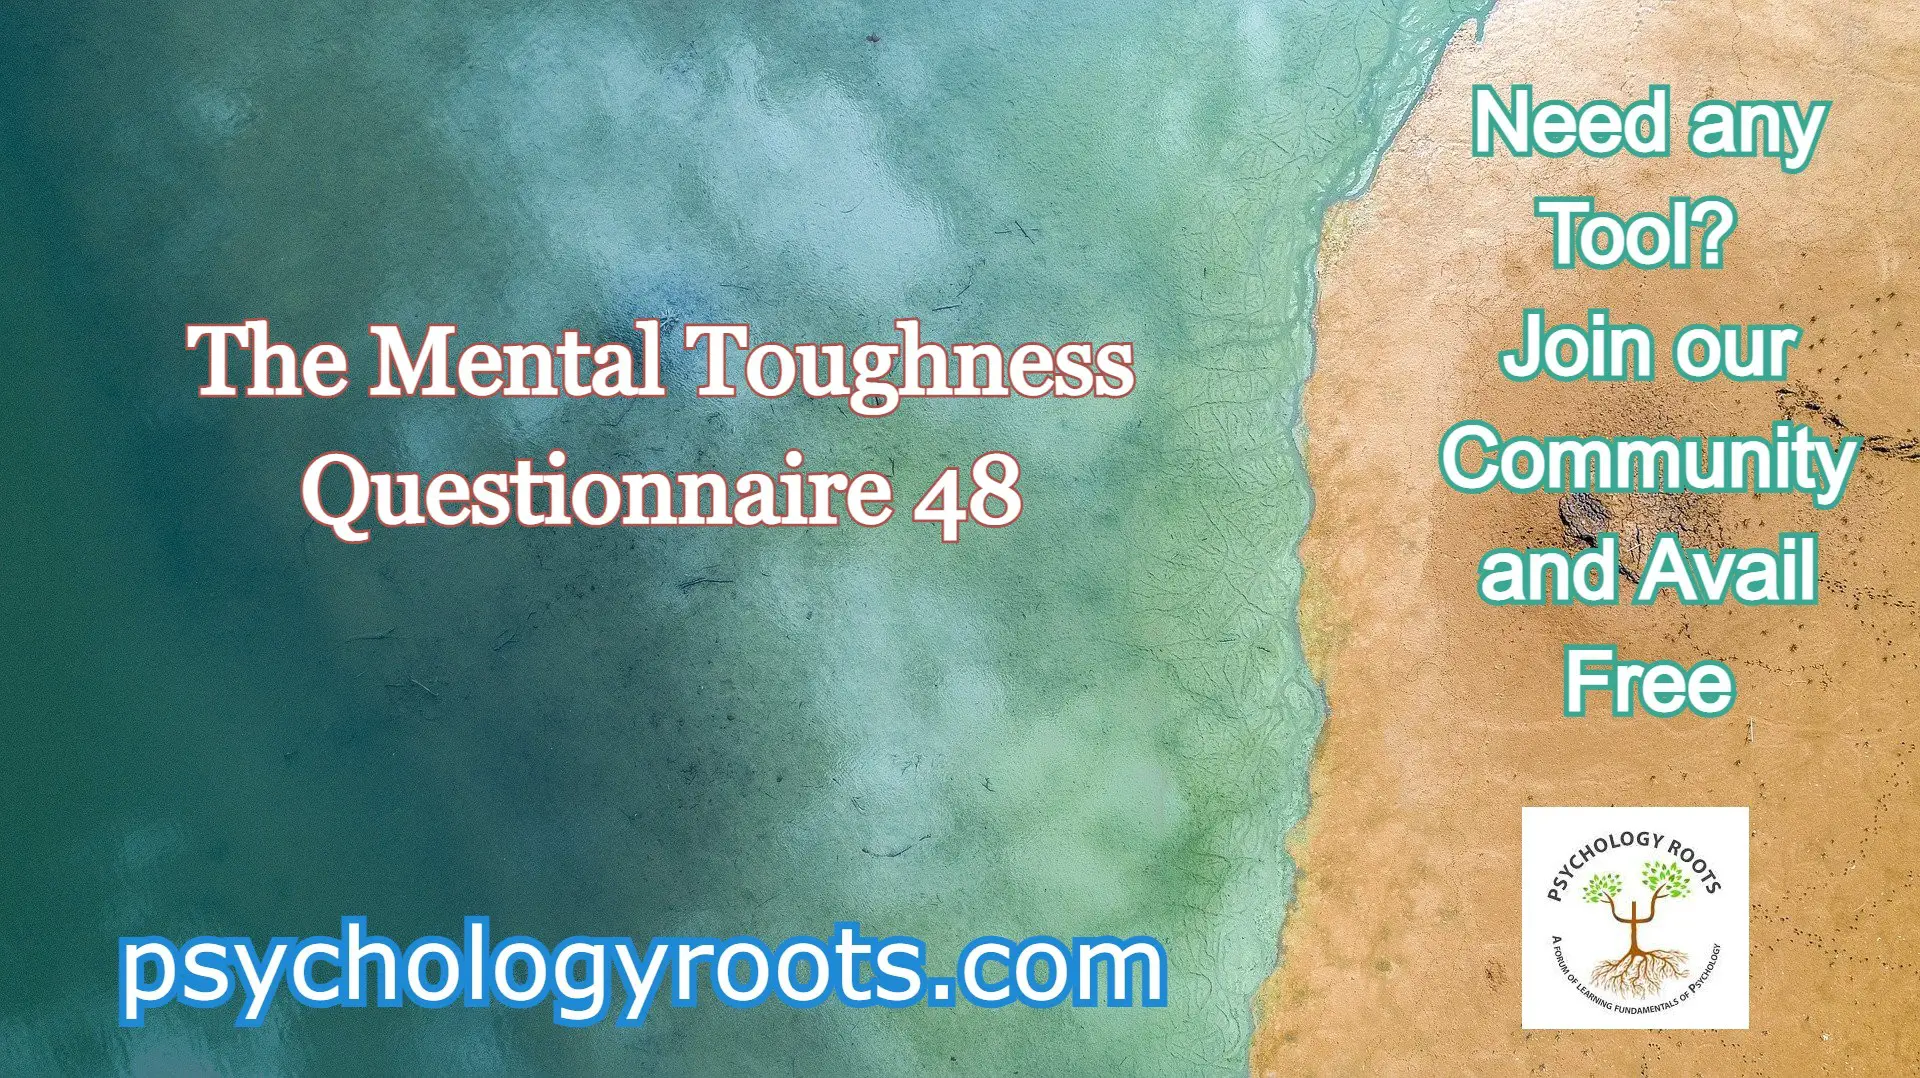 The Mental Toughness Questionnaire 48